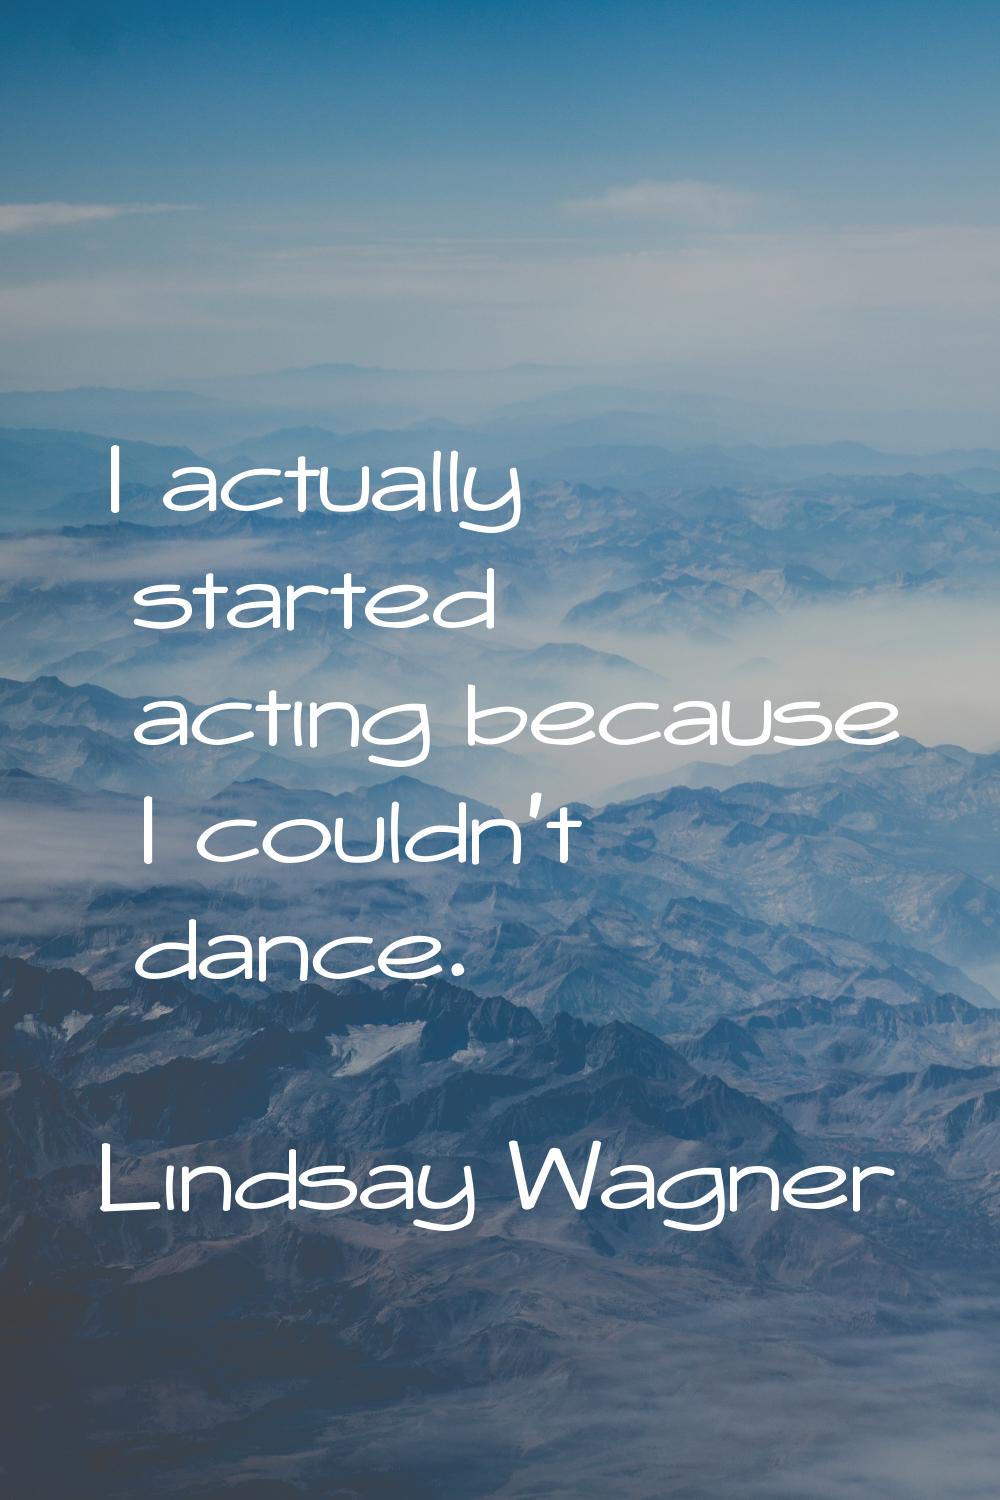 I actually started acting because I couldn't dance.